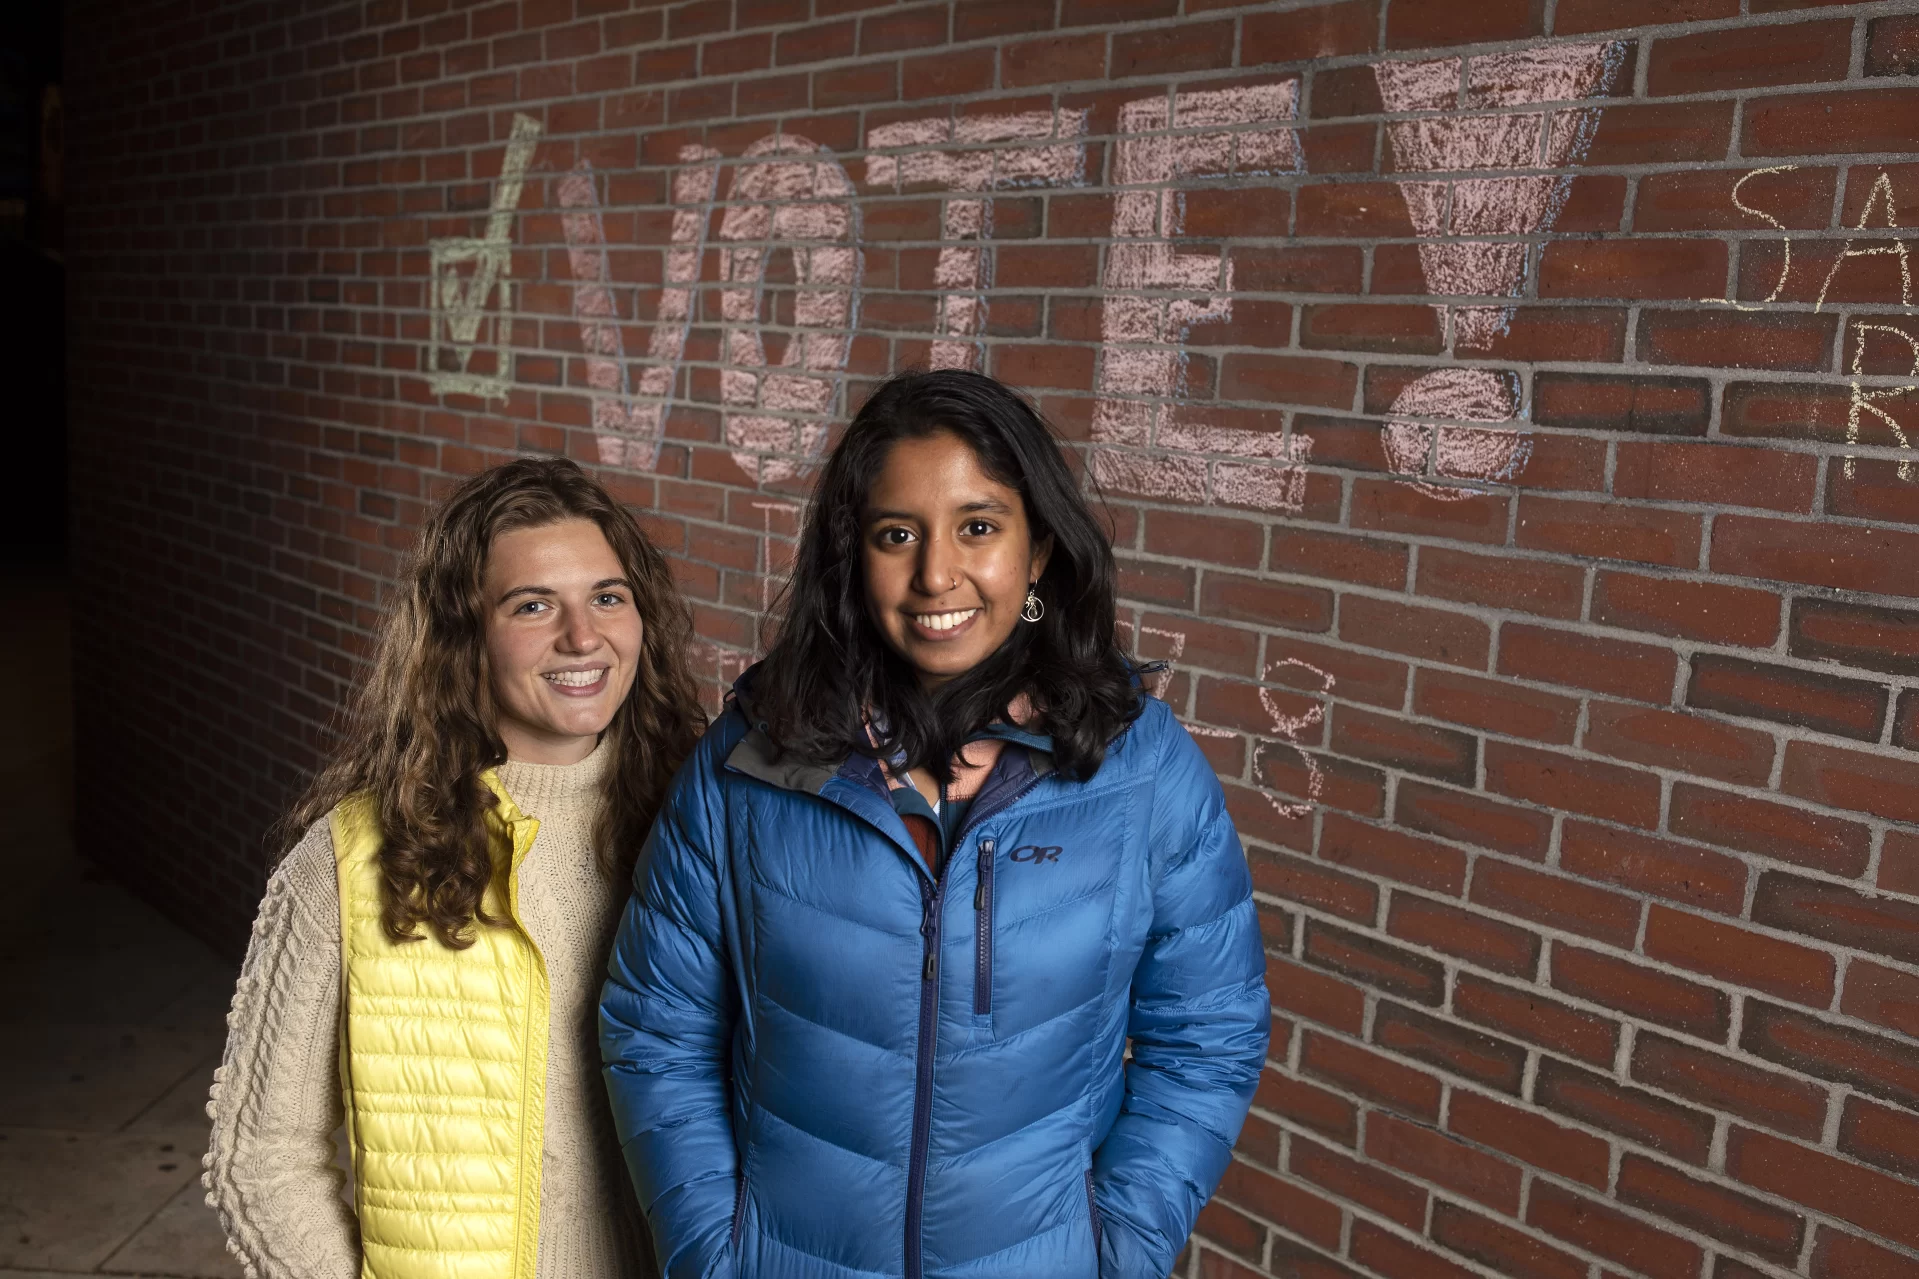 From left, Amalia Herren-Lage ’22 of Shoreham, Vt., and Ashka Jhaveri ’22 of Chappaqua, N.Y., pose in front of some chalking in the Library Aracade done to promote voting in the November 2021 election.

Bates was one of 48 colleges in the country recently honored for its outstanding student voting rate in the 2020 president election.

With 84.9 percent of eligible students heading to the polls in 2020, Bates garnered a platinum seal, awarded for voting rates over 80 percent by the ALL In Campus Democracy Challenge, a nonpartisan national awards program that recognizes colleges and universities for their commitment to increasing student voting. 

“The cultivation of ‘informed civic action’ is a pillar of our institutional mission,” said Darby Ray, director of the Harward Center for Community Partnerships, which oversees the nonpartisan voter mobilization effort, known as Bates Votes.

“Voting, including voter education, registration, and mobilization, is a crucial form of civic action and the very foundation of a thriving democracy.”

The 2020 edition of Bates Votes was coordinated by students Amalia Herren-Lage ’22 of Shoreham, Vt., and Ashka Jhaveri ’22 of Chappaqua, N.Y., with strategic support from Peggy Rotundo, who retired in 2021 as the Harward Center’s director of strategic and policy initiatives.